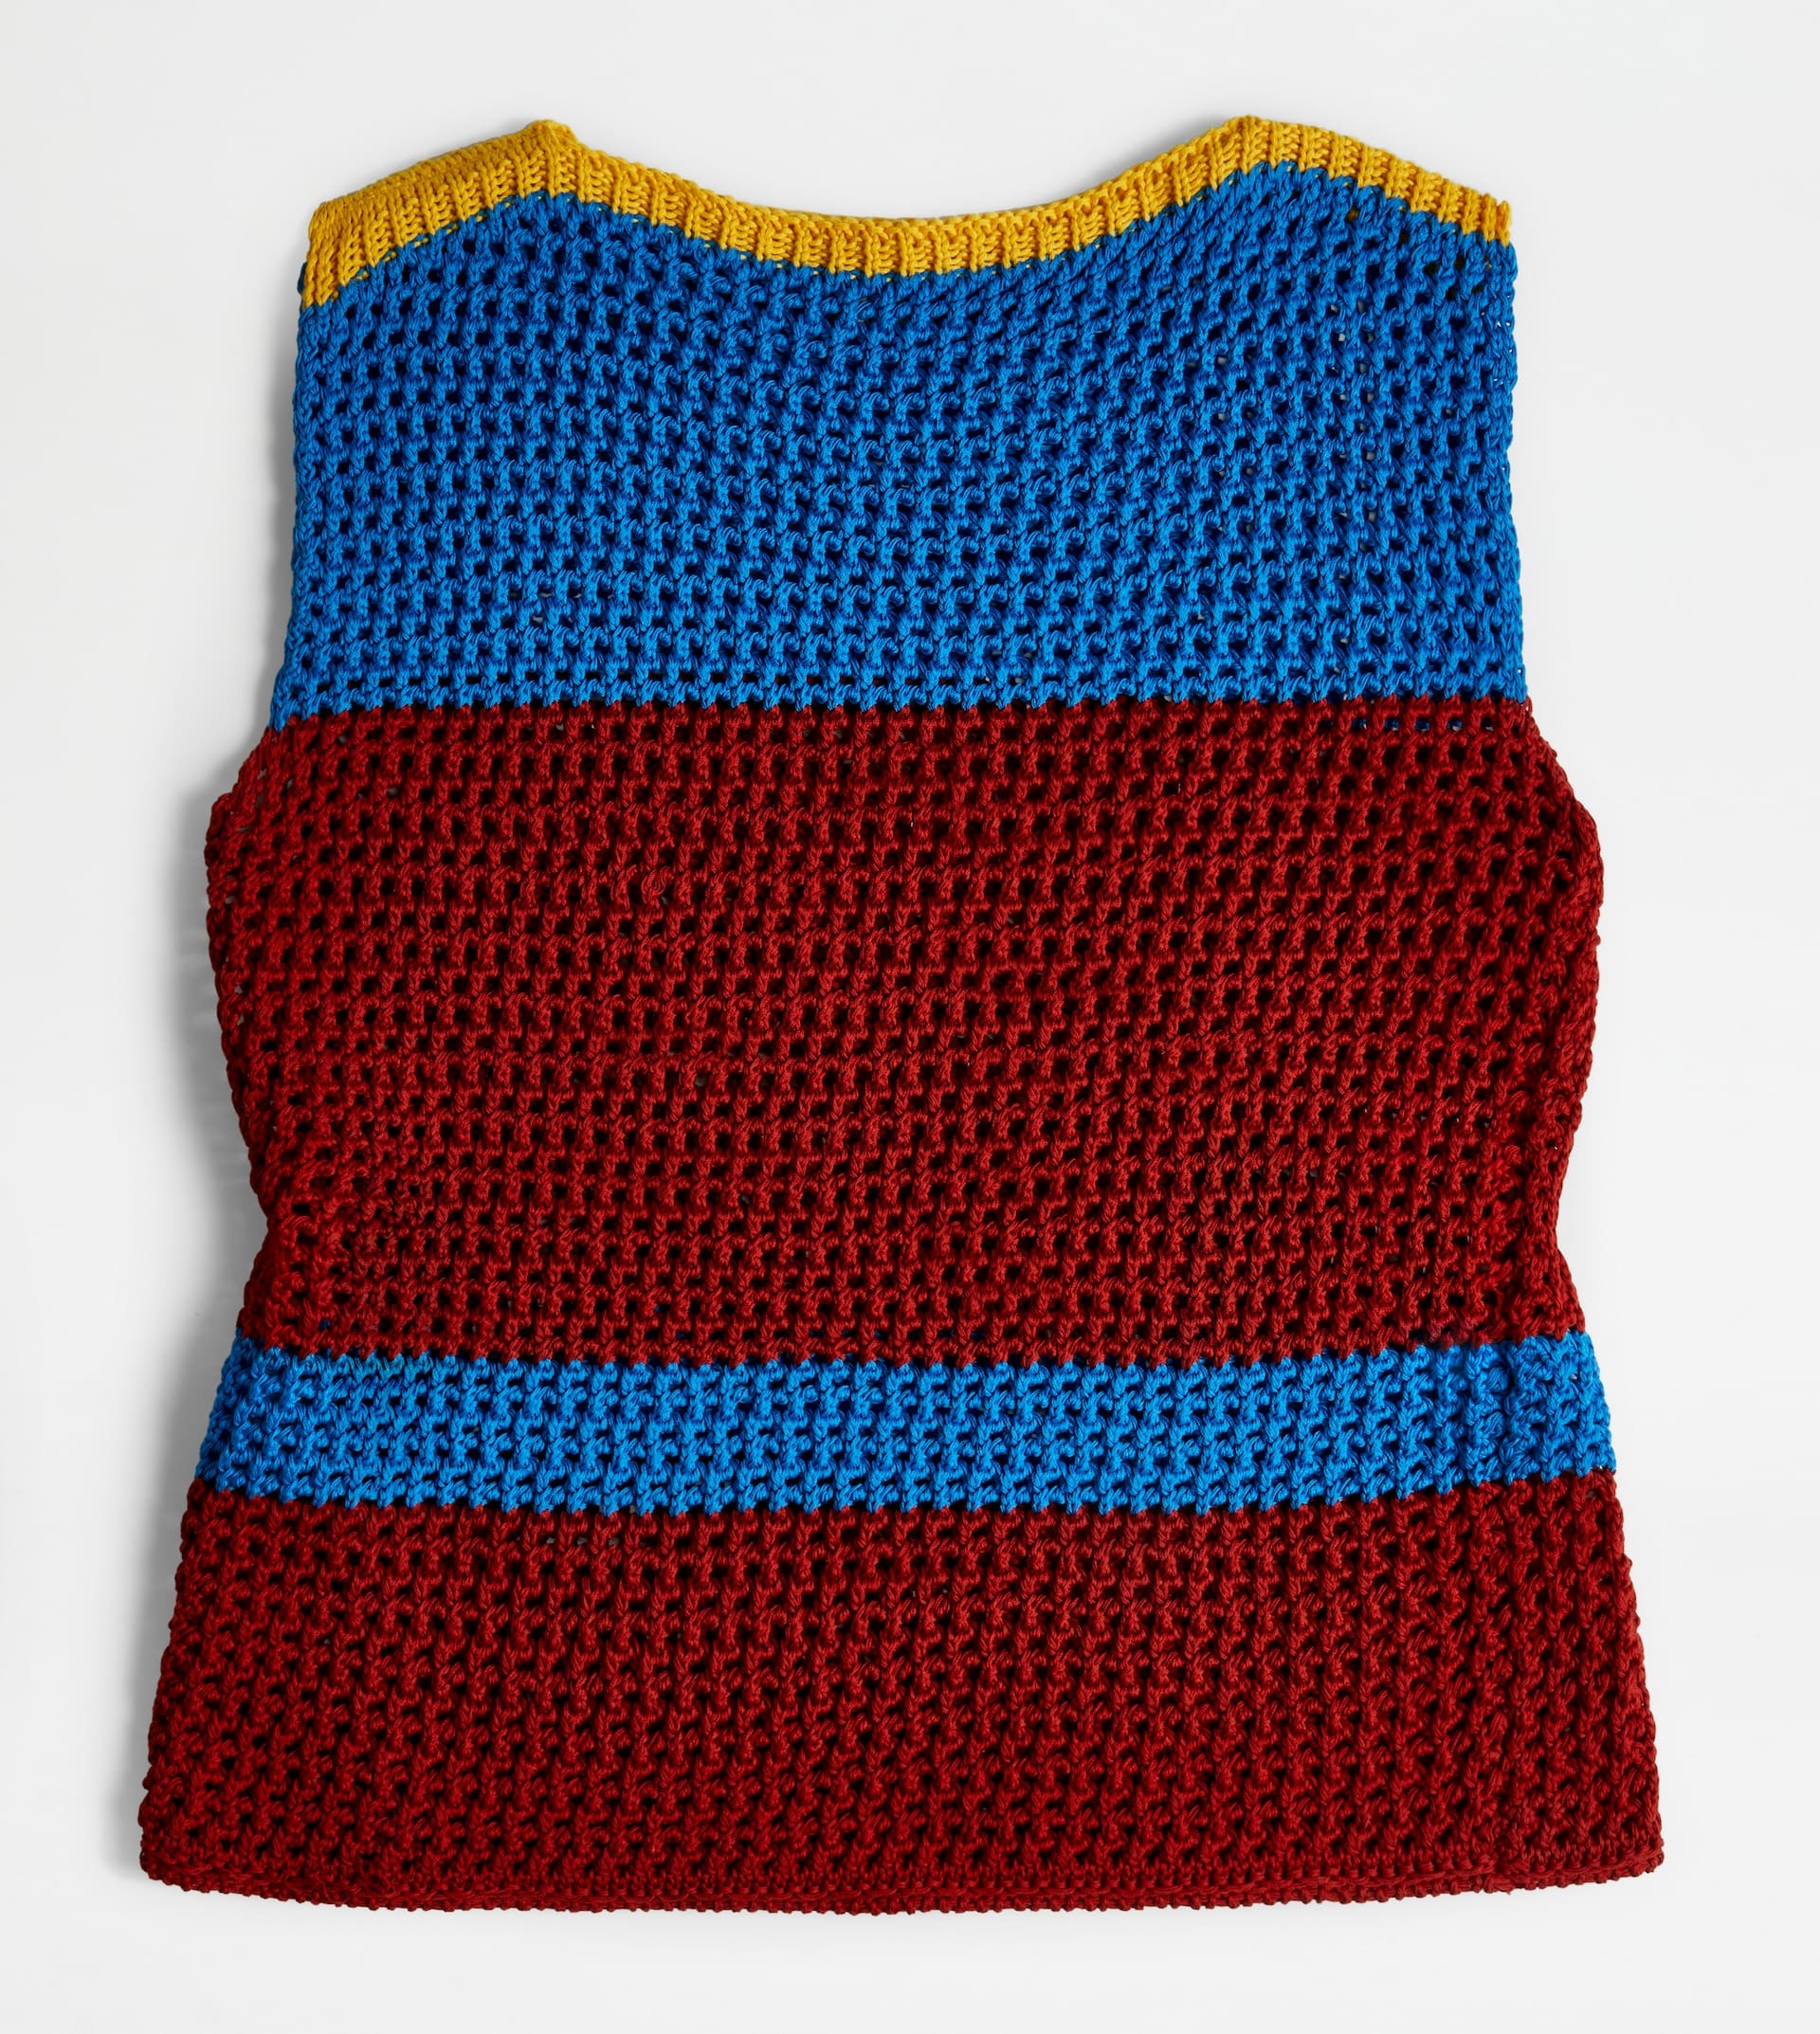 TOP IN COTTON KNIT - RED, LIGHT BLUE, YELLOW - 1